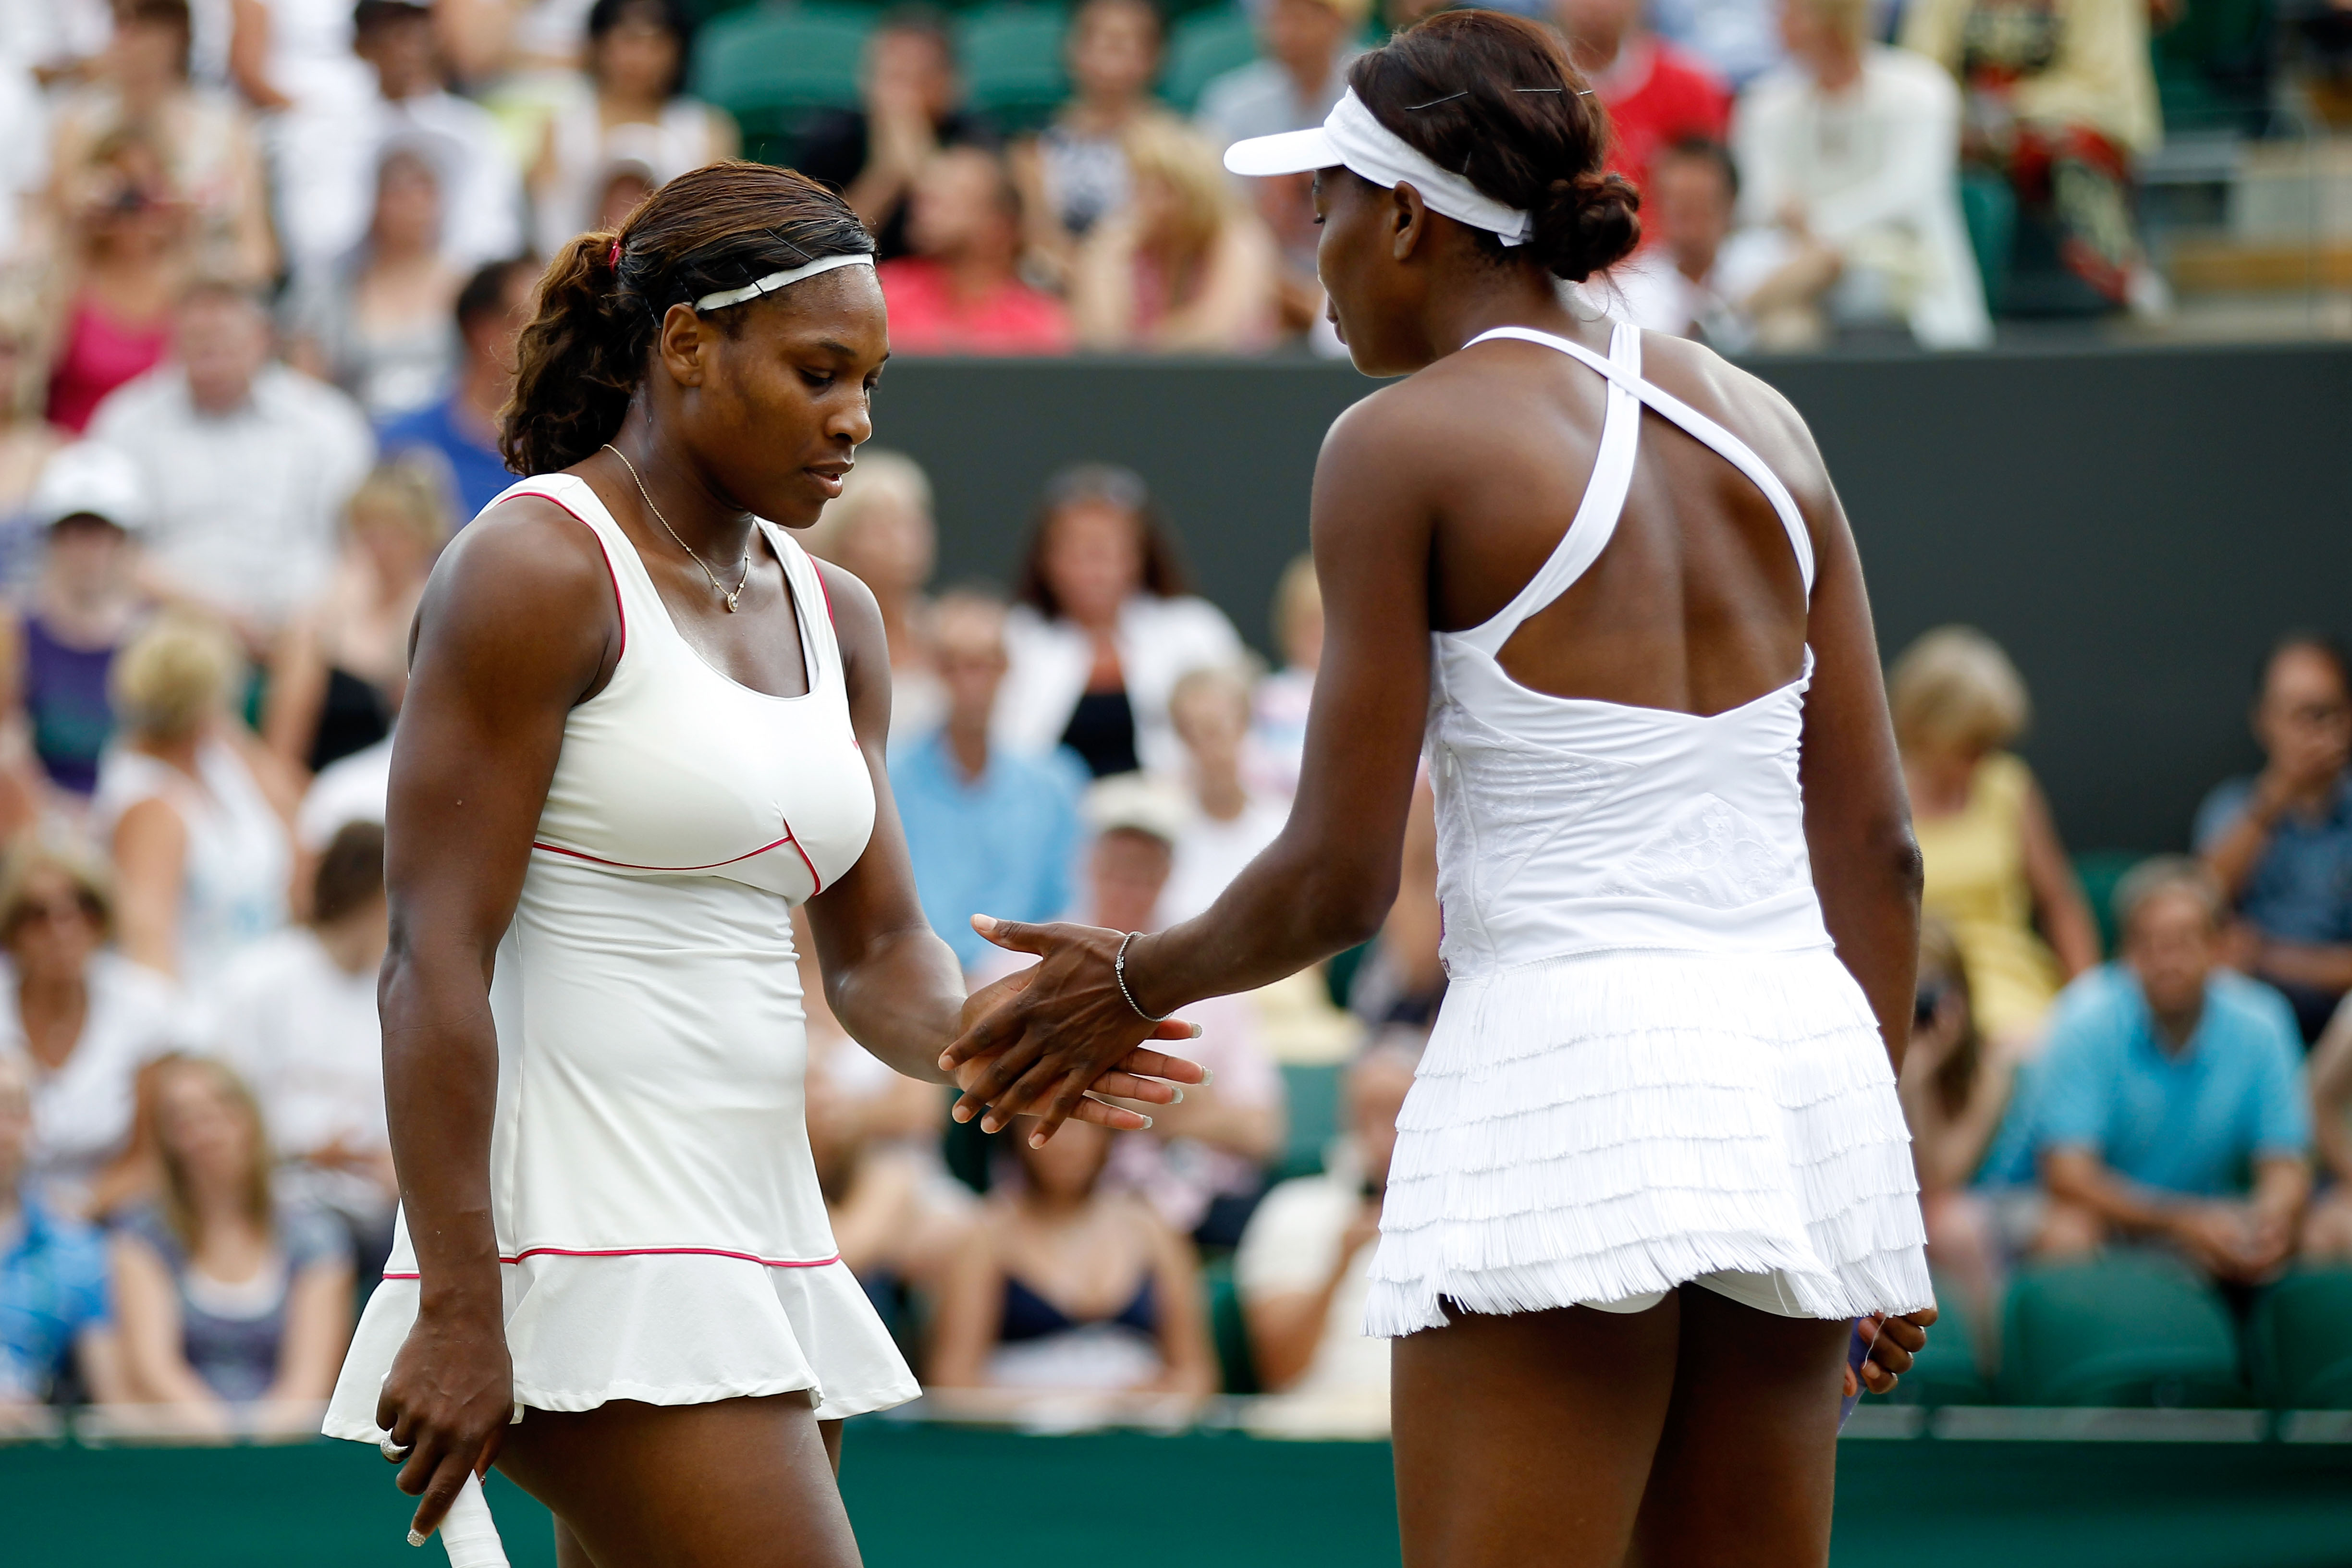 LONDON, ENGLAND - JUNE 26:  Serena Williams of USA and Venus Williams of USA in action during their doubles match against Dominika Cibulkova of Slovakia and Anastasia Pavlyuchenkova of Russia  on Day Six of the Wimbledon Lawn Tennis Championships at the A